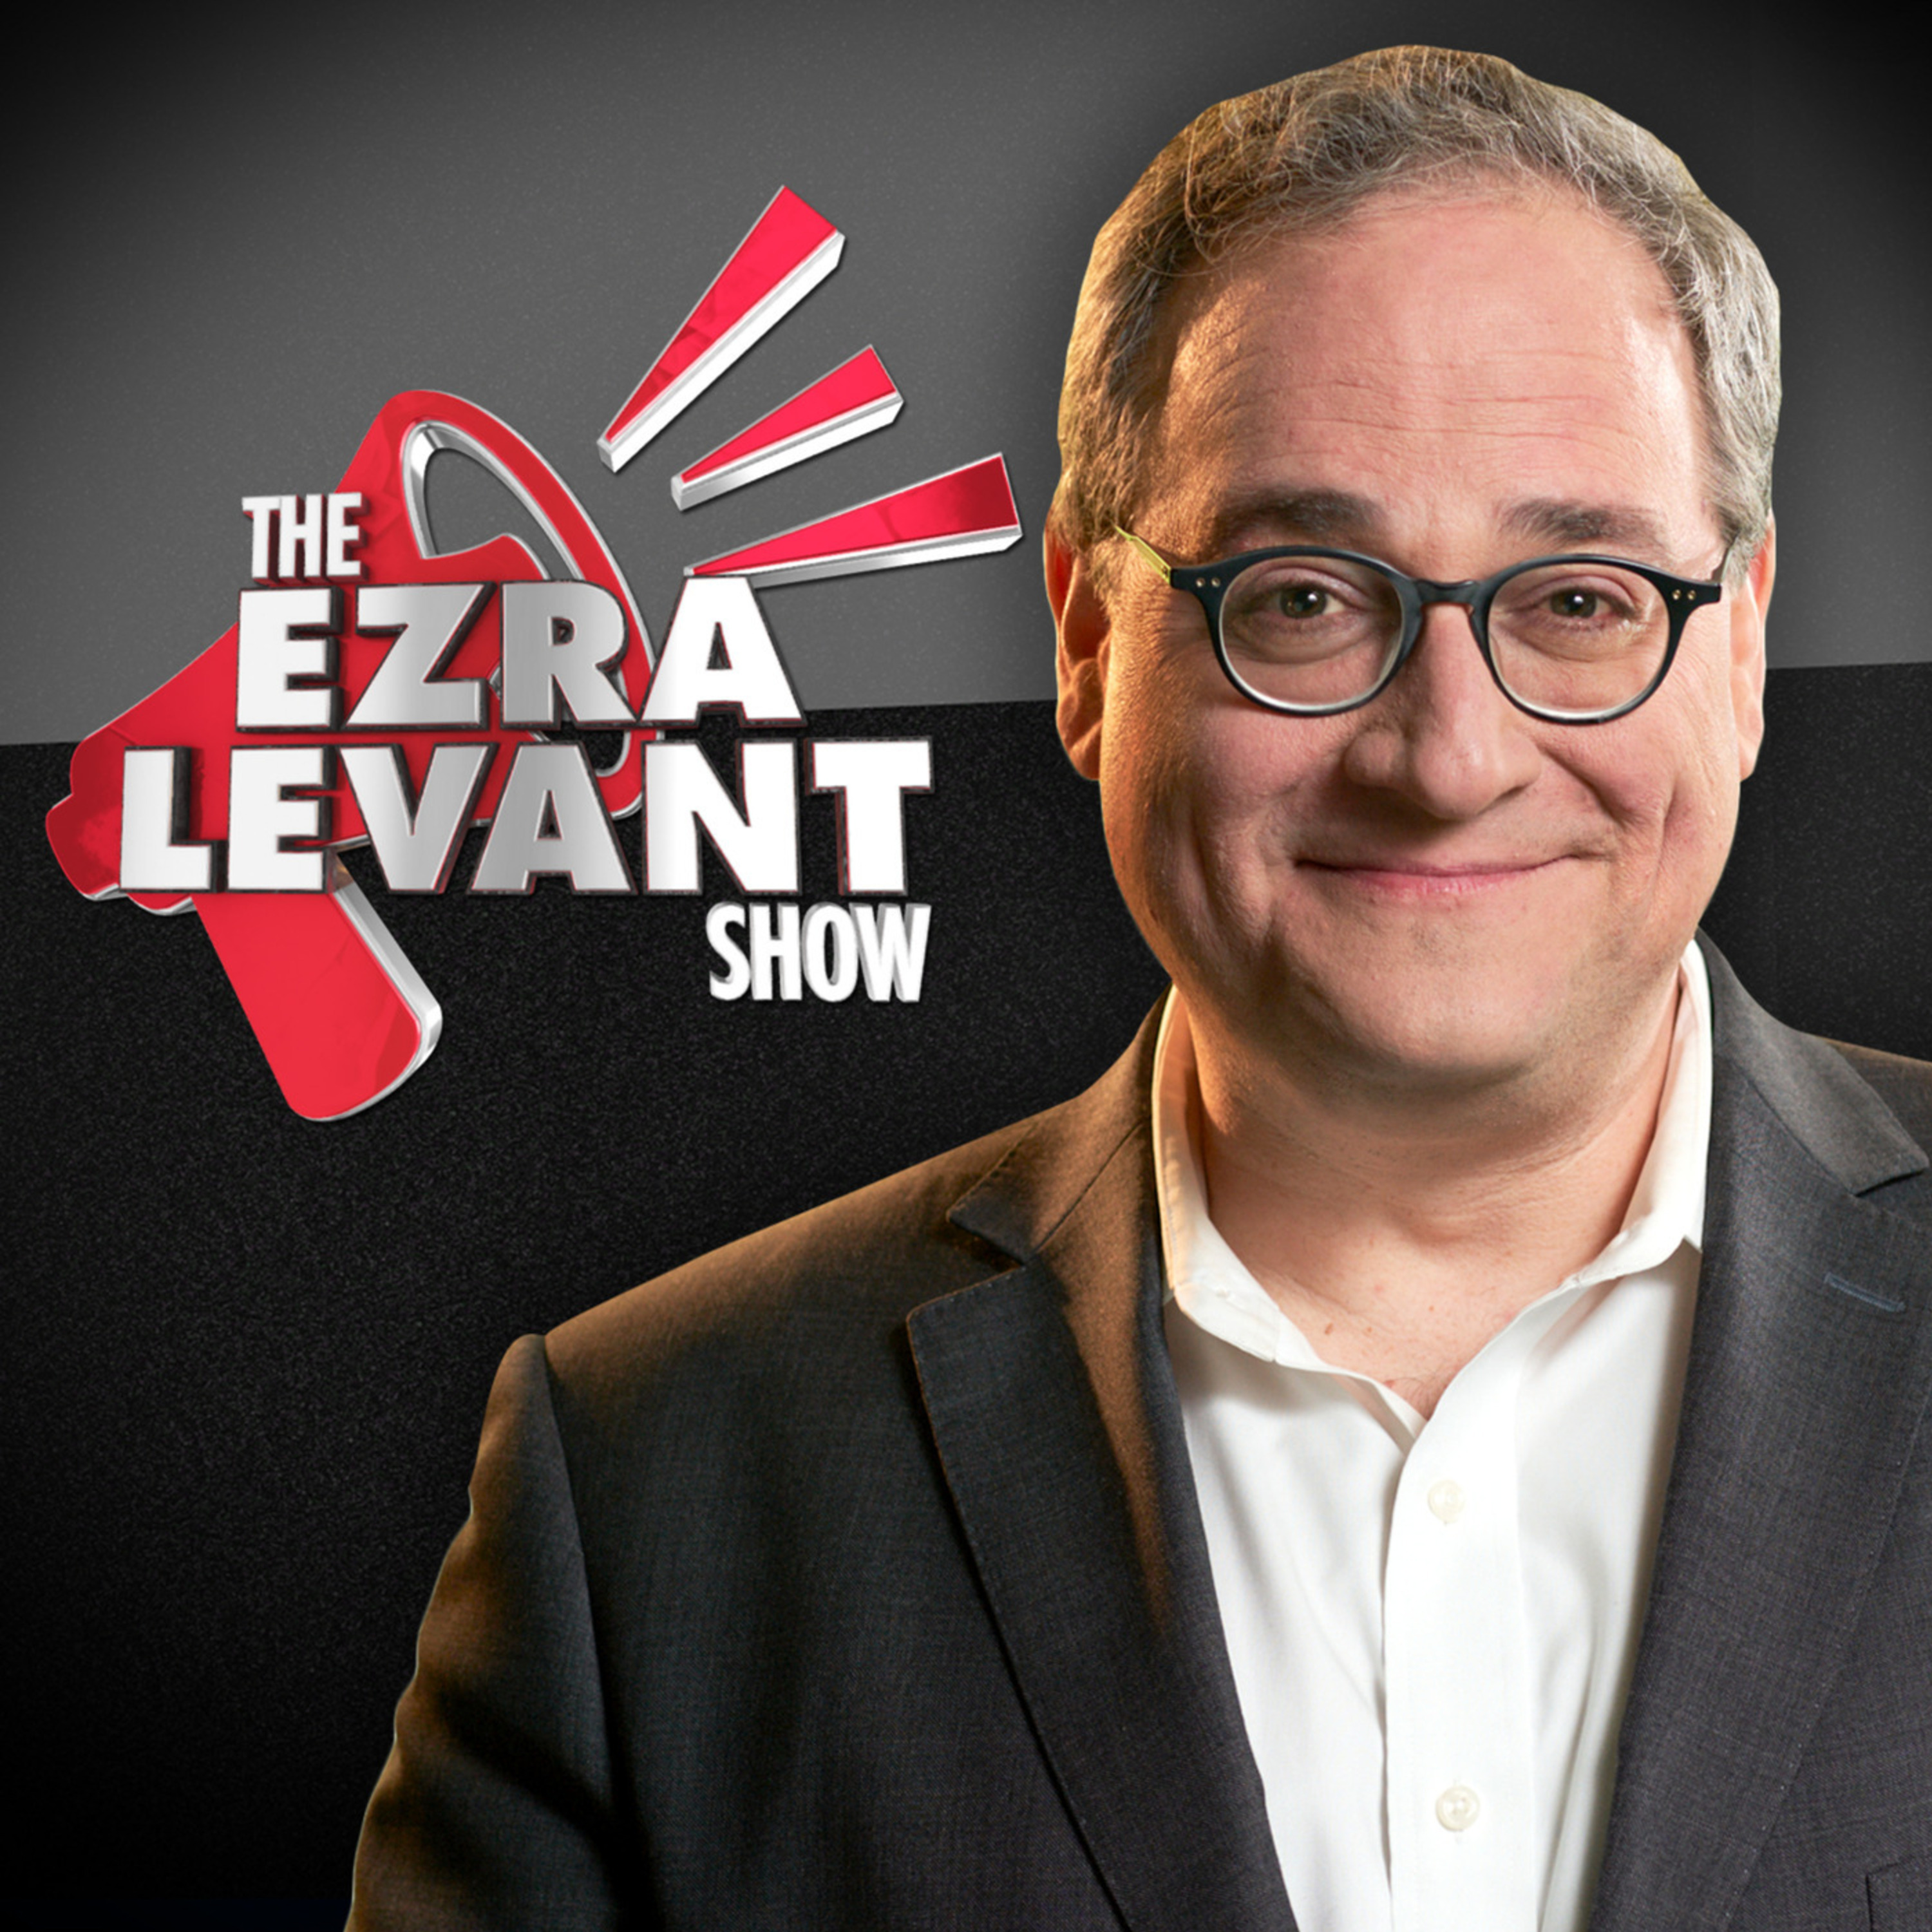 EZRA LEVANT | Steven Guilbeault pays his debts with just days to spare  — using other people’s money!